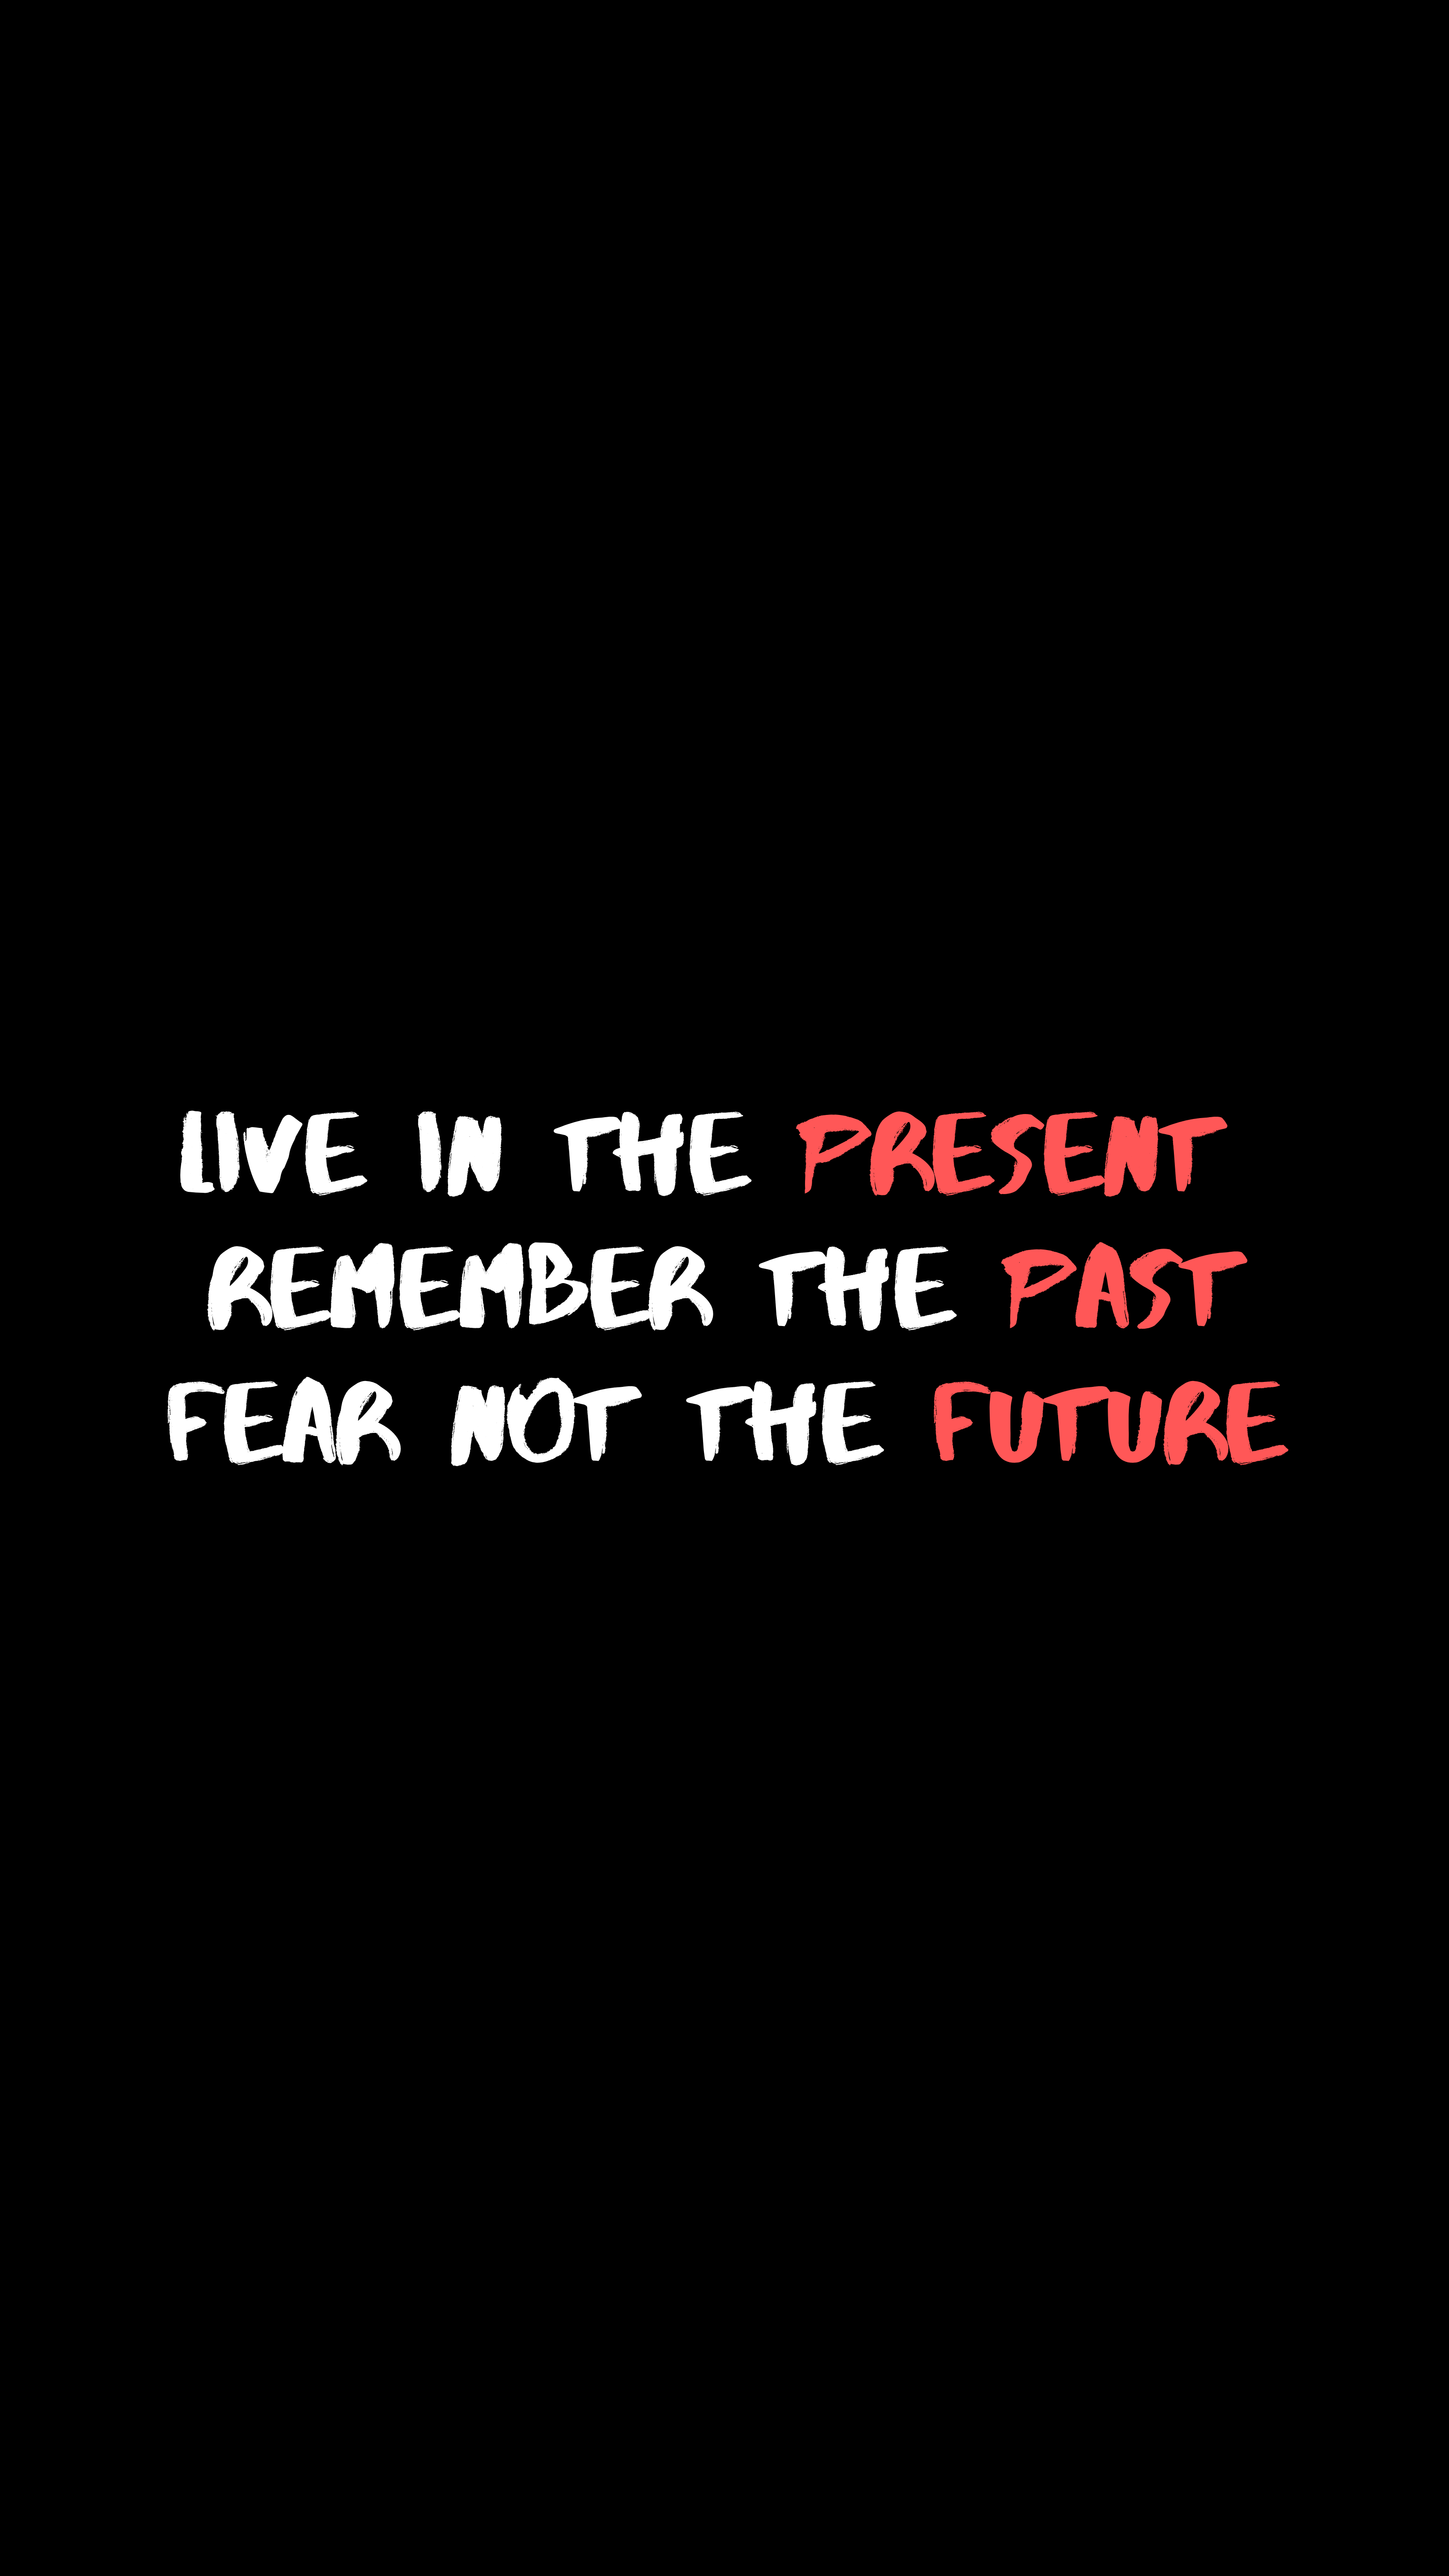 future, words, inspiration, present, motivation, quote, quotation, past lock screen backgrounds